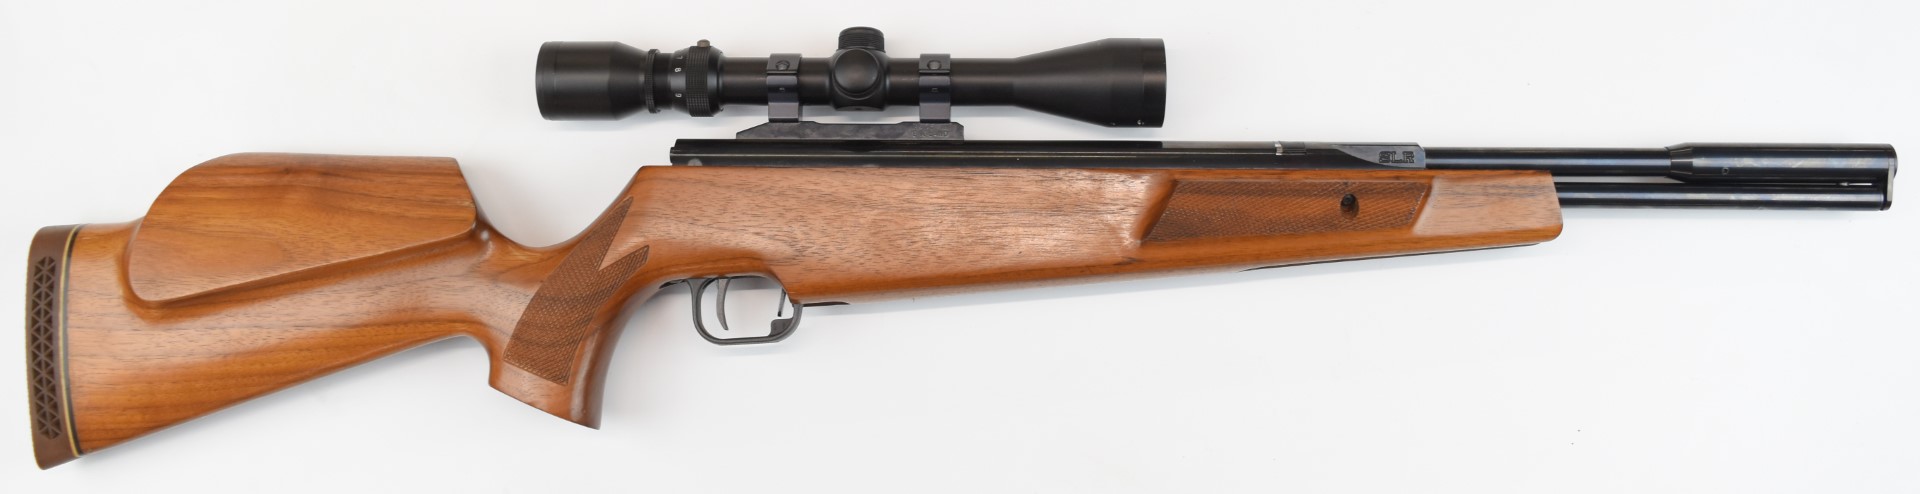 Theoben SLR 190/98 .22 under-lever carbine air rifle with seven shot magazine, chequered semi-pistol - Image 2 of 20